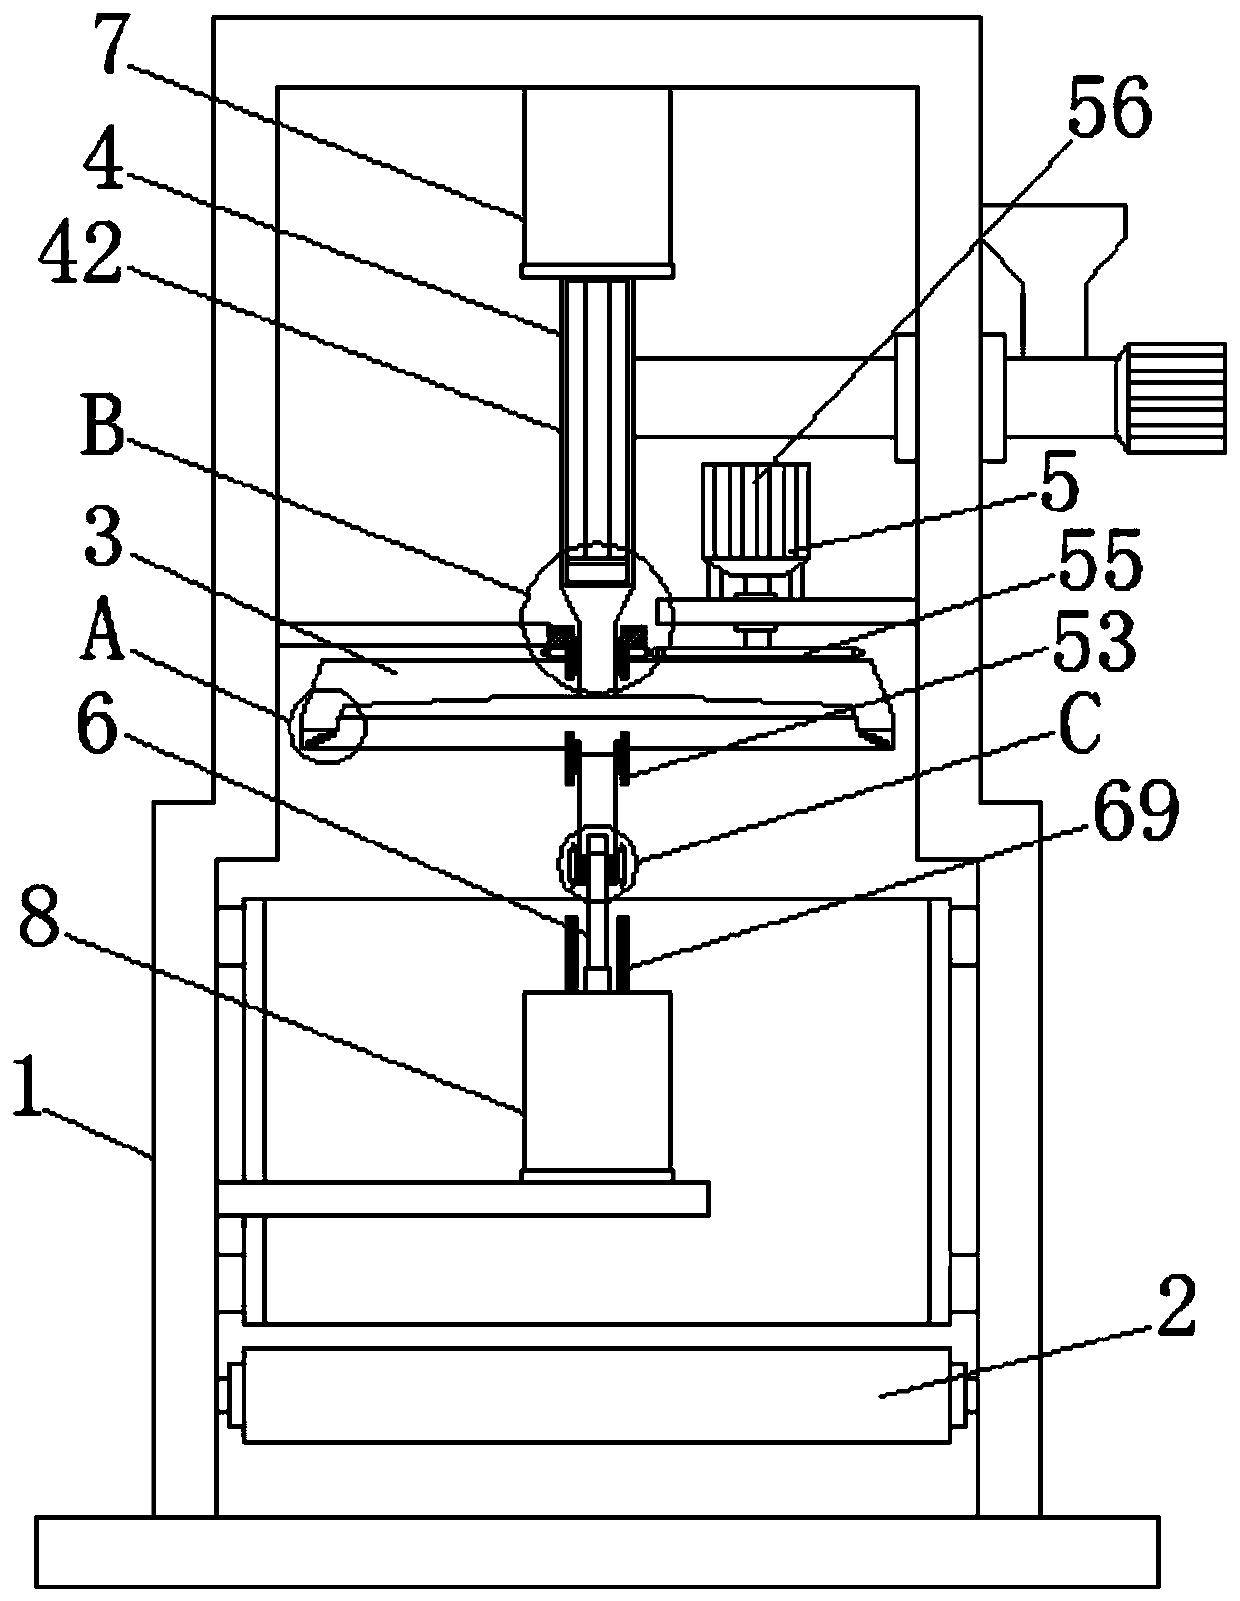 Molding device for dumpling wrappers